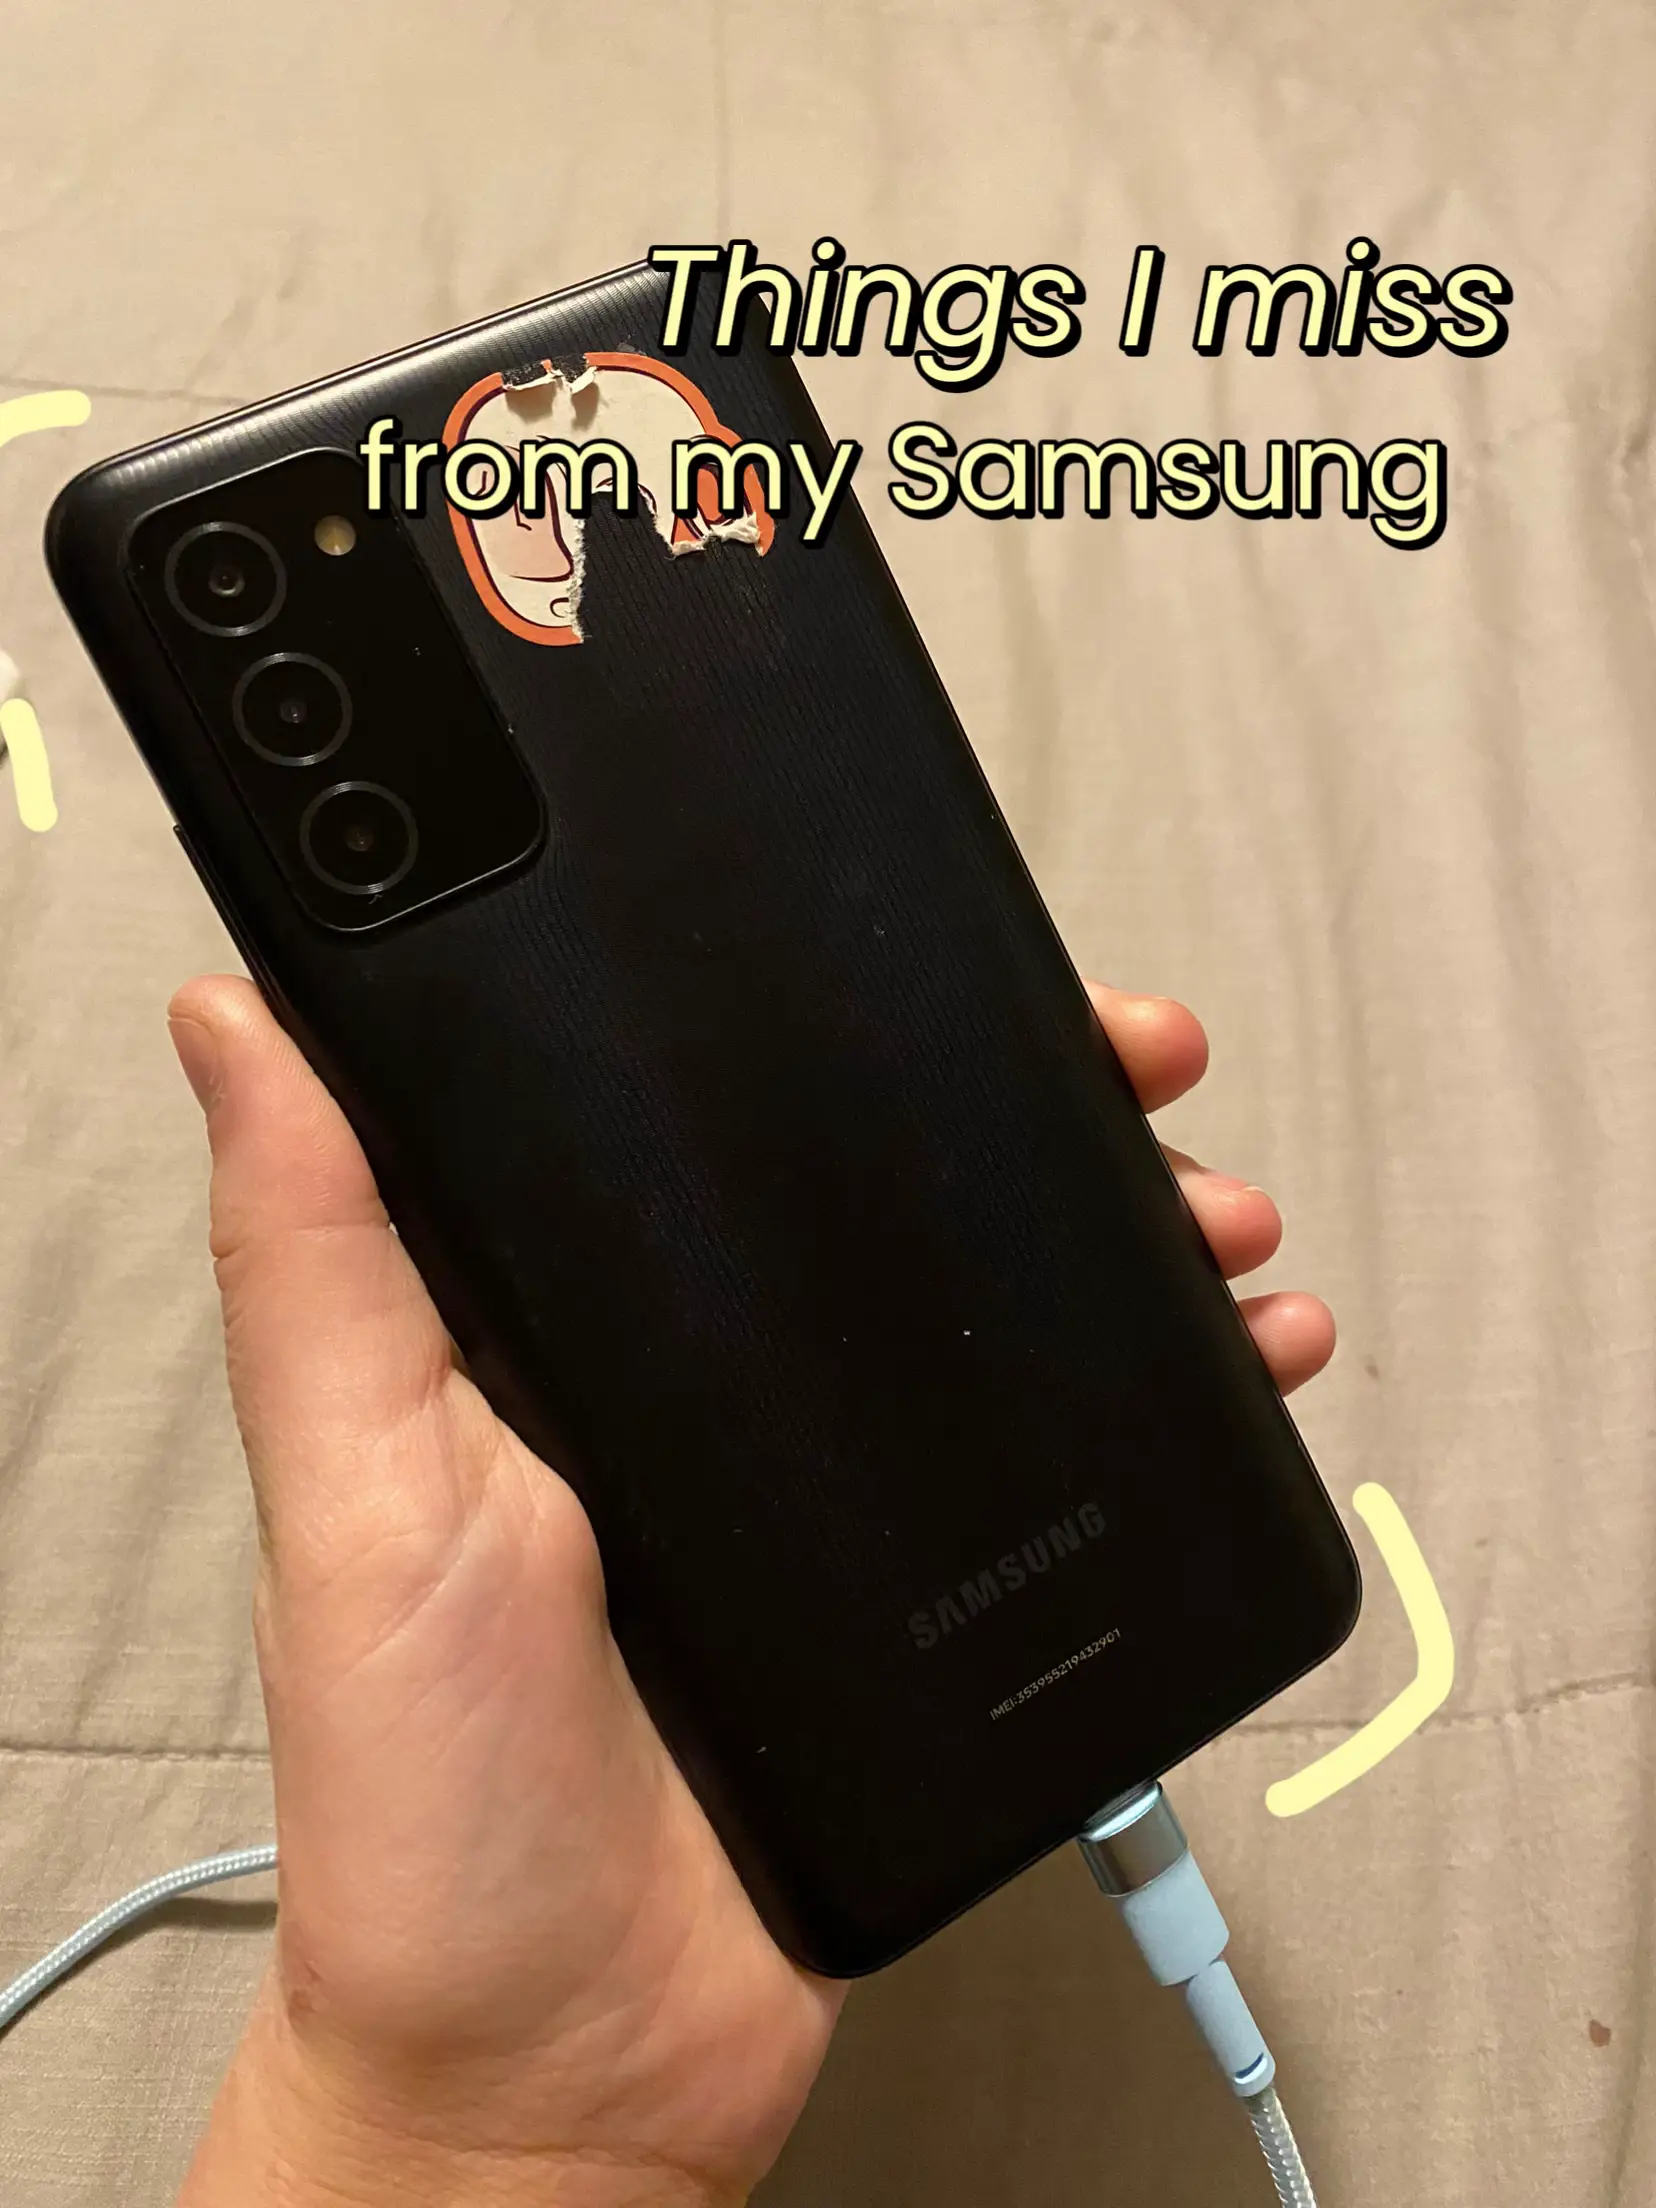 Samsung Galaxy Smart Tag seriously harmed our cat : r/samsunggalaxy